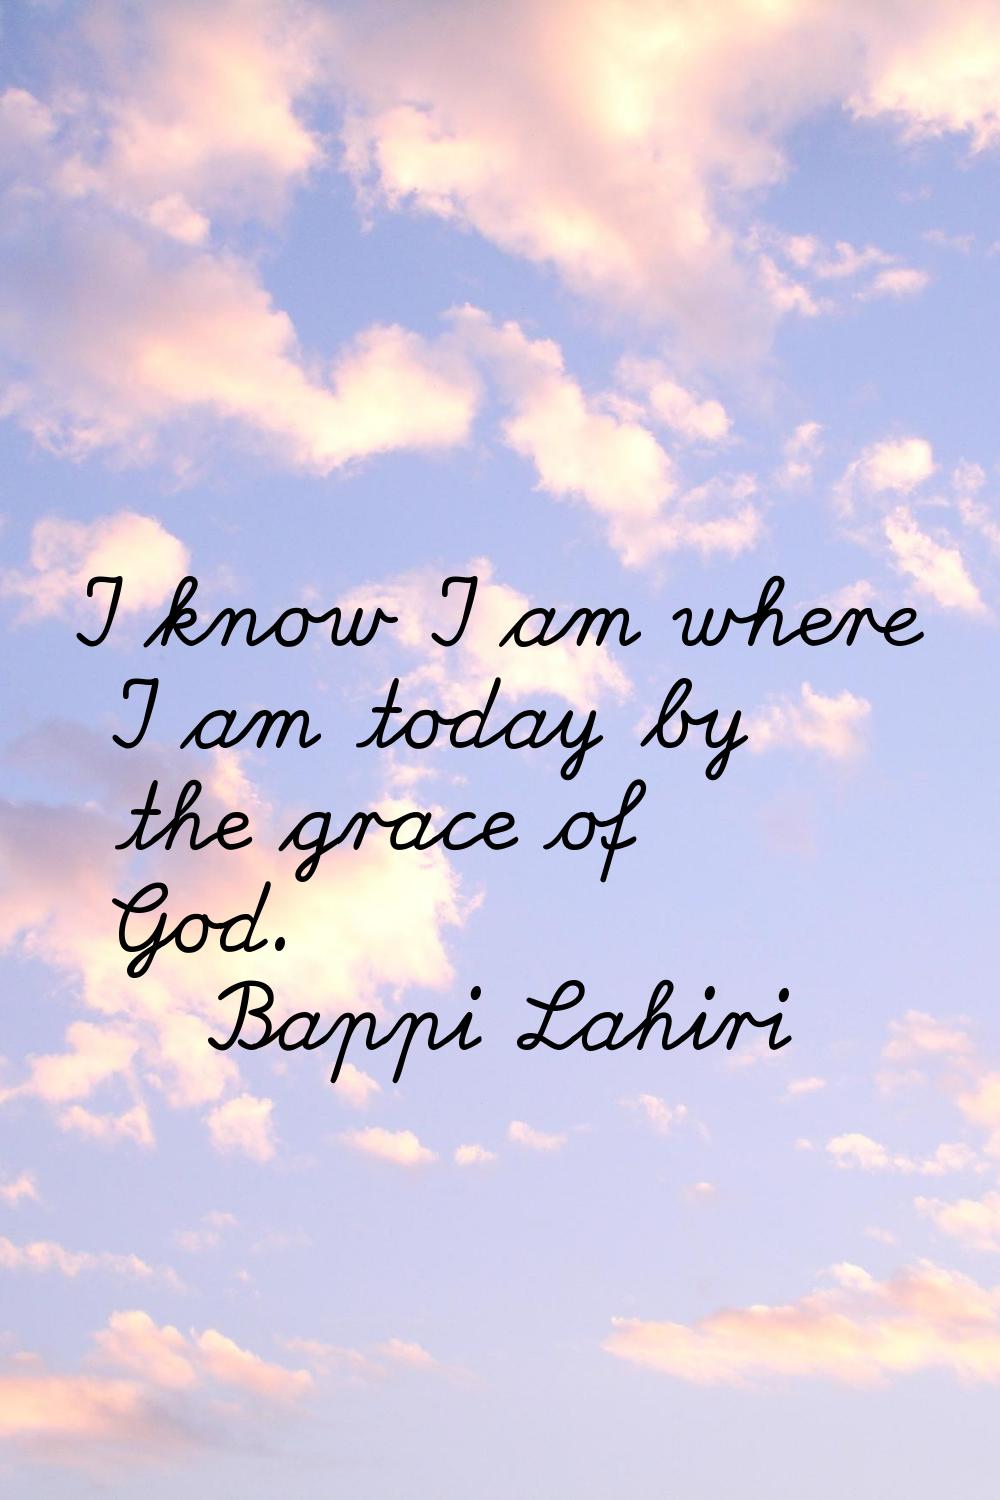 I know I am where I am today by the grace of God.